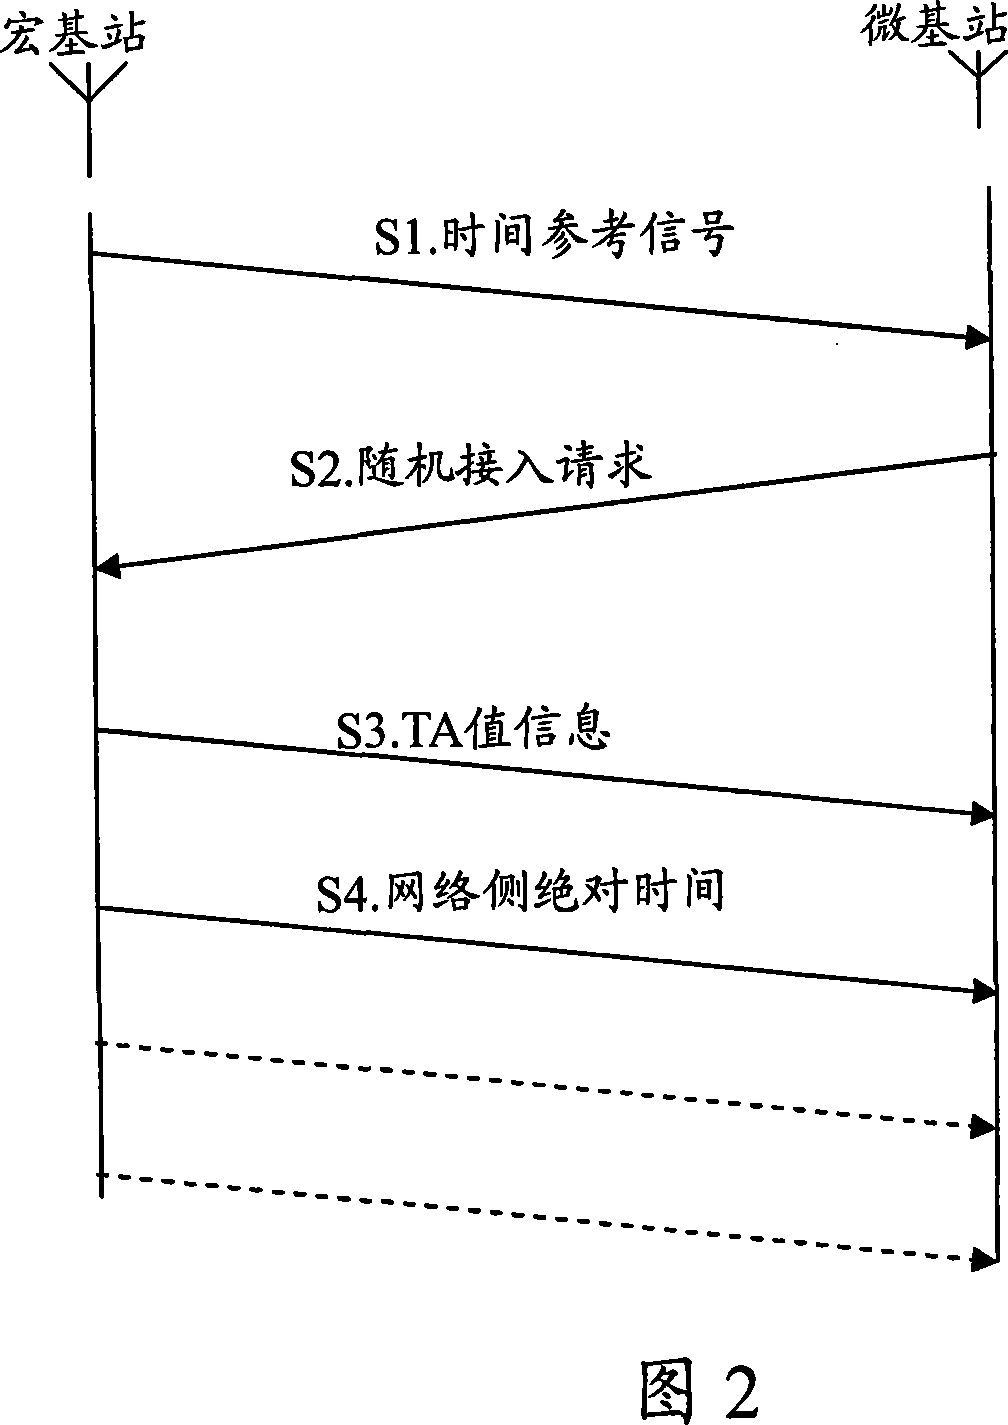 System and method for synchronizing microcellular network basestation and base station